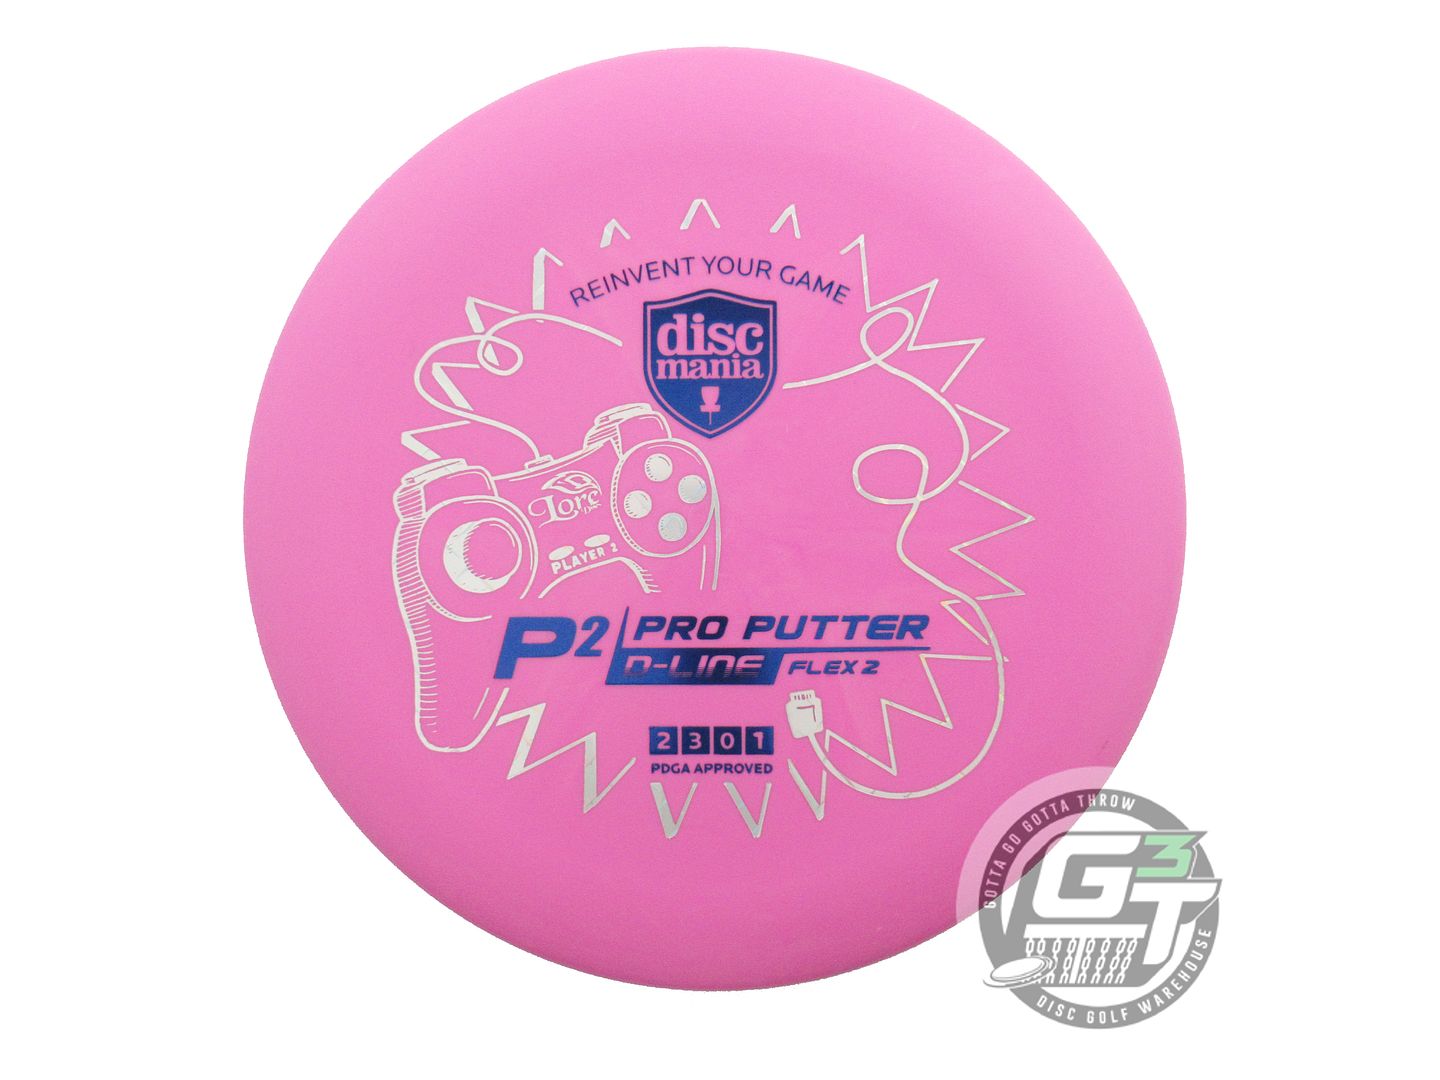 Discmania Limited Edition Lore Controller Originals D-Line Flex 2 P2 Pro Putter Golf Disc (Individually Listed)